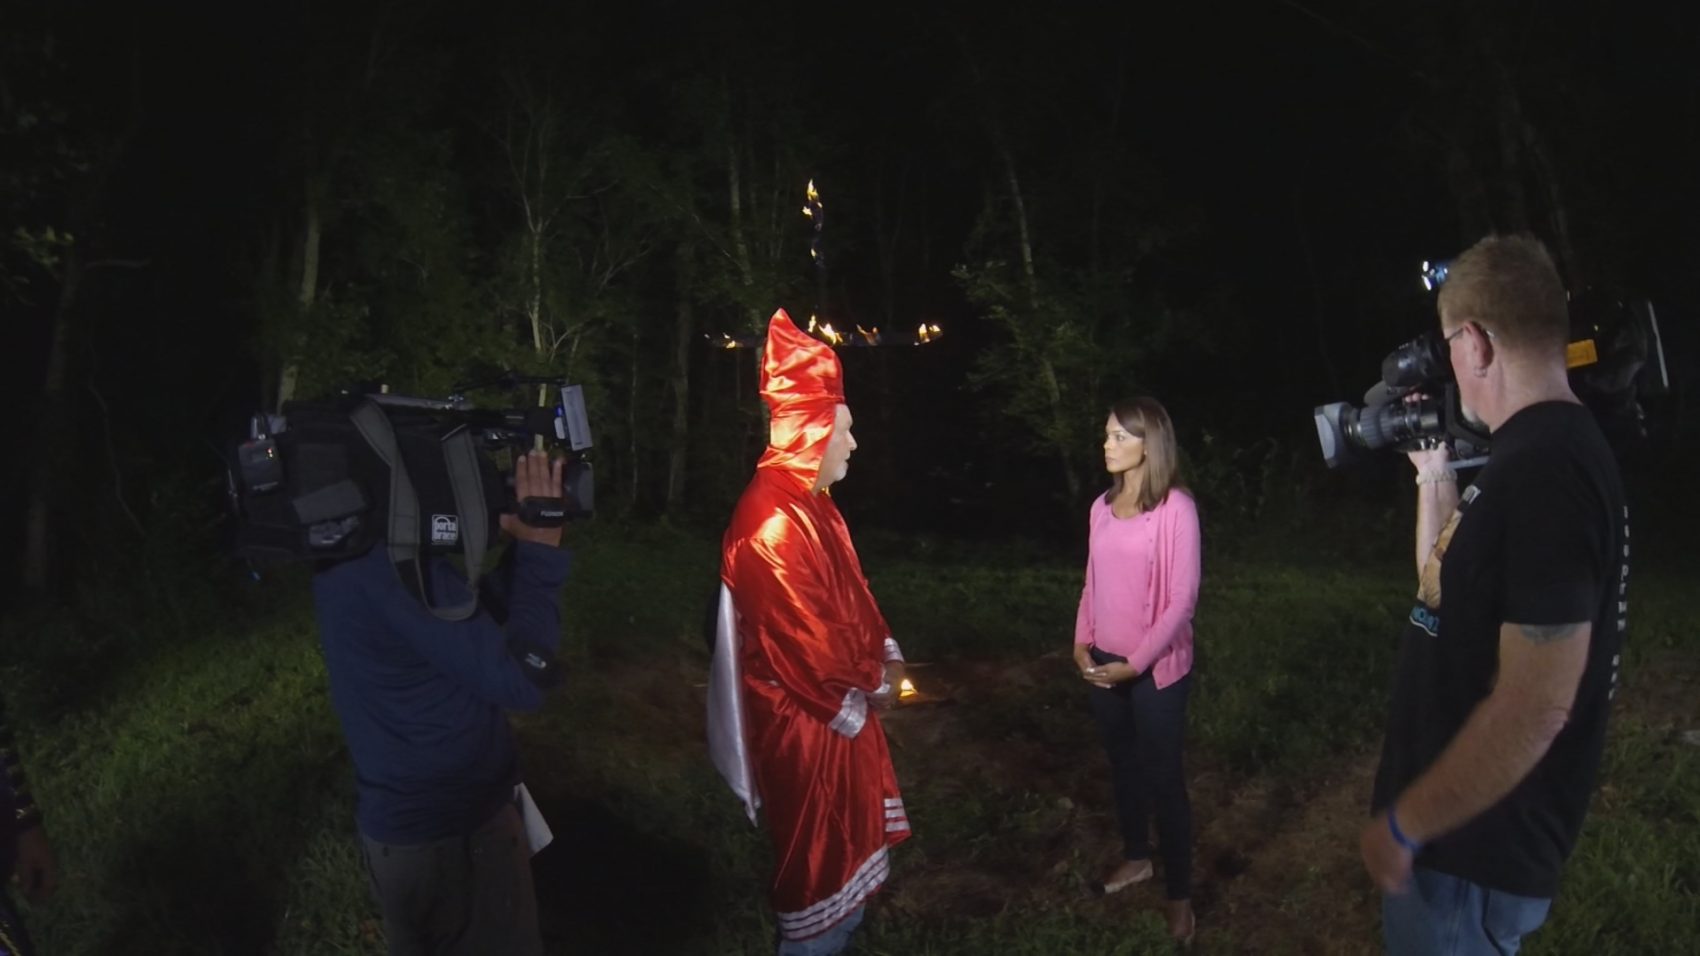 Univision's Ilia Calderón interviewing Christopher Barker, imperial wizard of the Loyal White Knights of the Ku Klux Klan, in North Carolina. (Courtesy Univision)